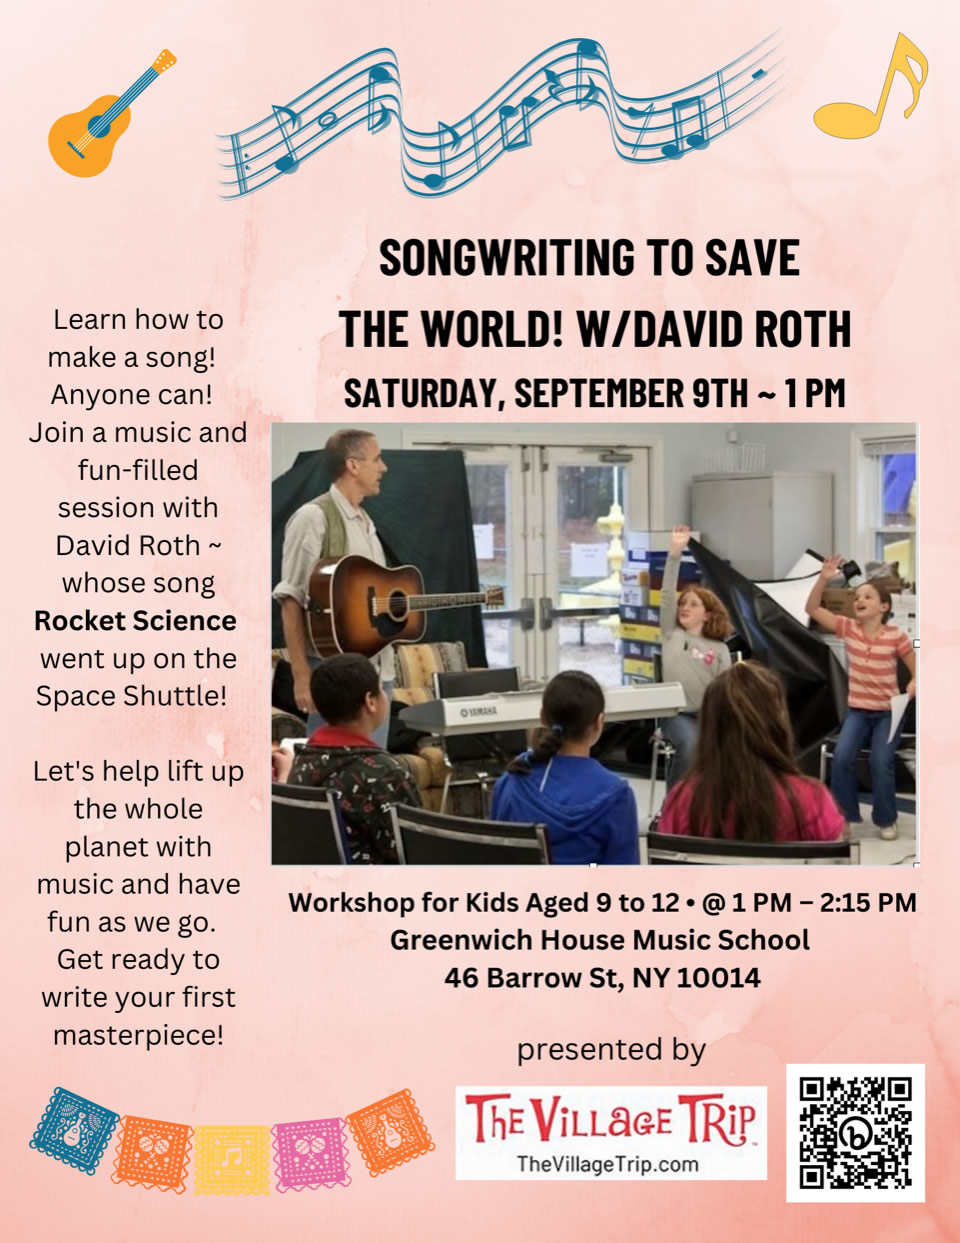 David Roth Songwriting Workshop 9 to 12 years